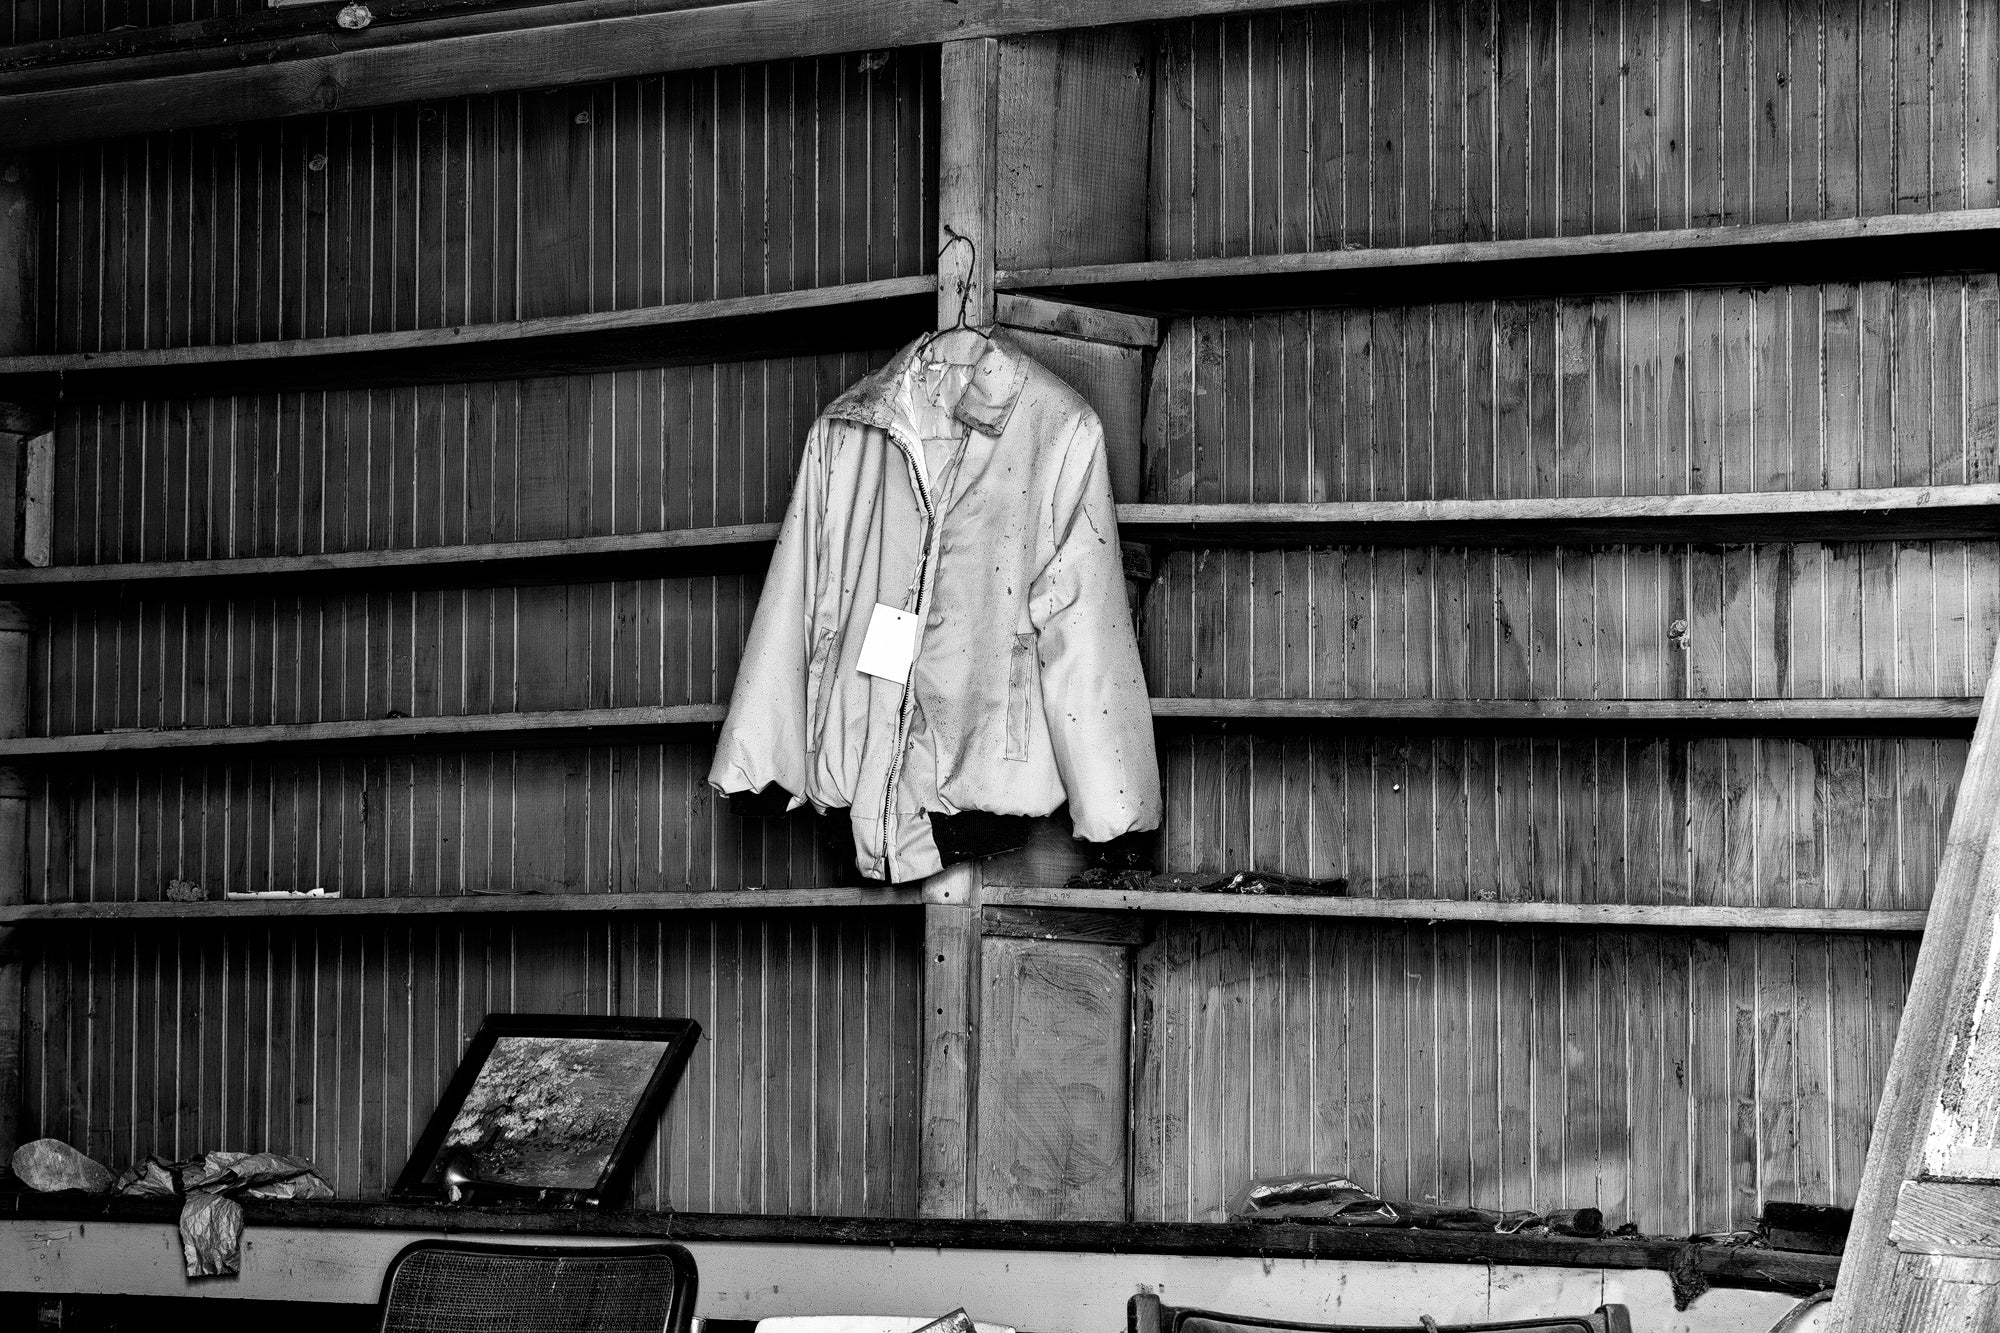 Blue Jacket with Sale Tag Hanging in an Abandoned Old Country Store - Black and White Photograph by Keith Dotson. Buy a fine art print.